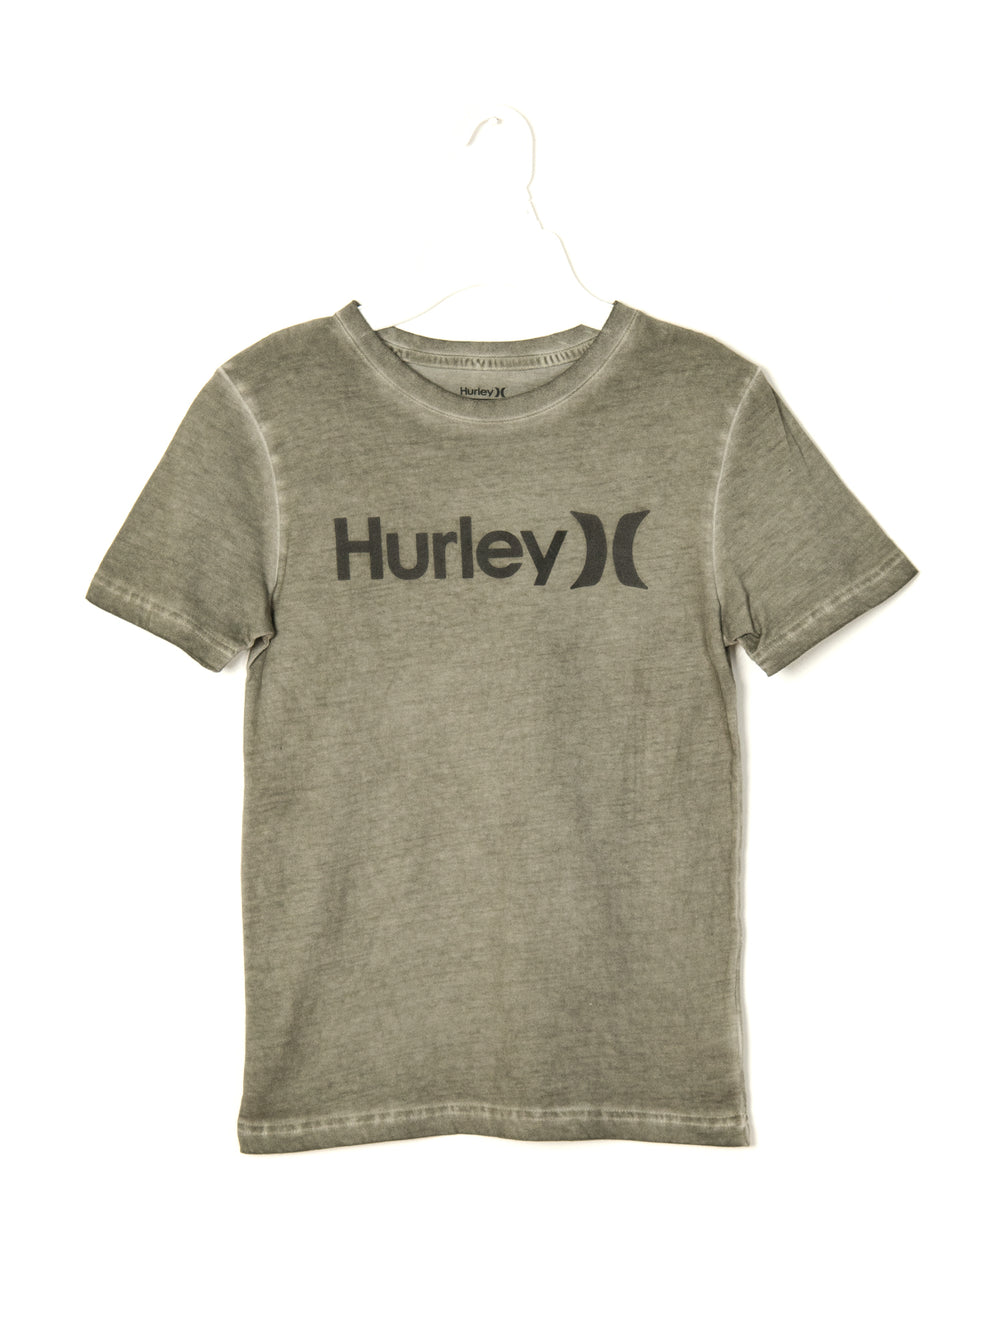 HURLEY YOUTH BOYS ONE & ONLY T-SHIRT - DESTOCKAGE